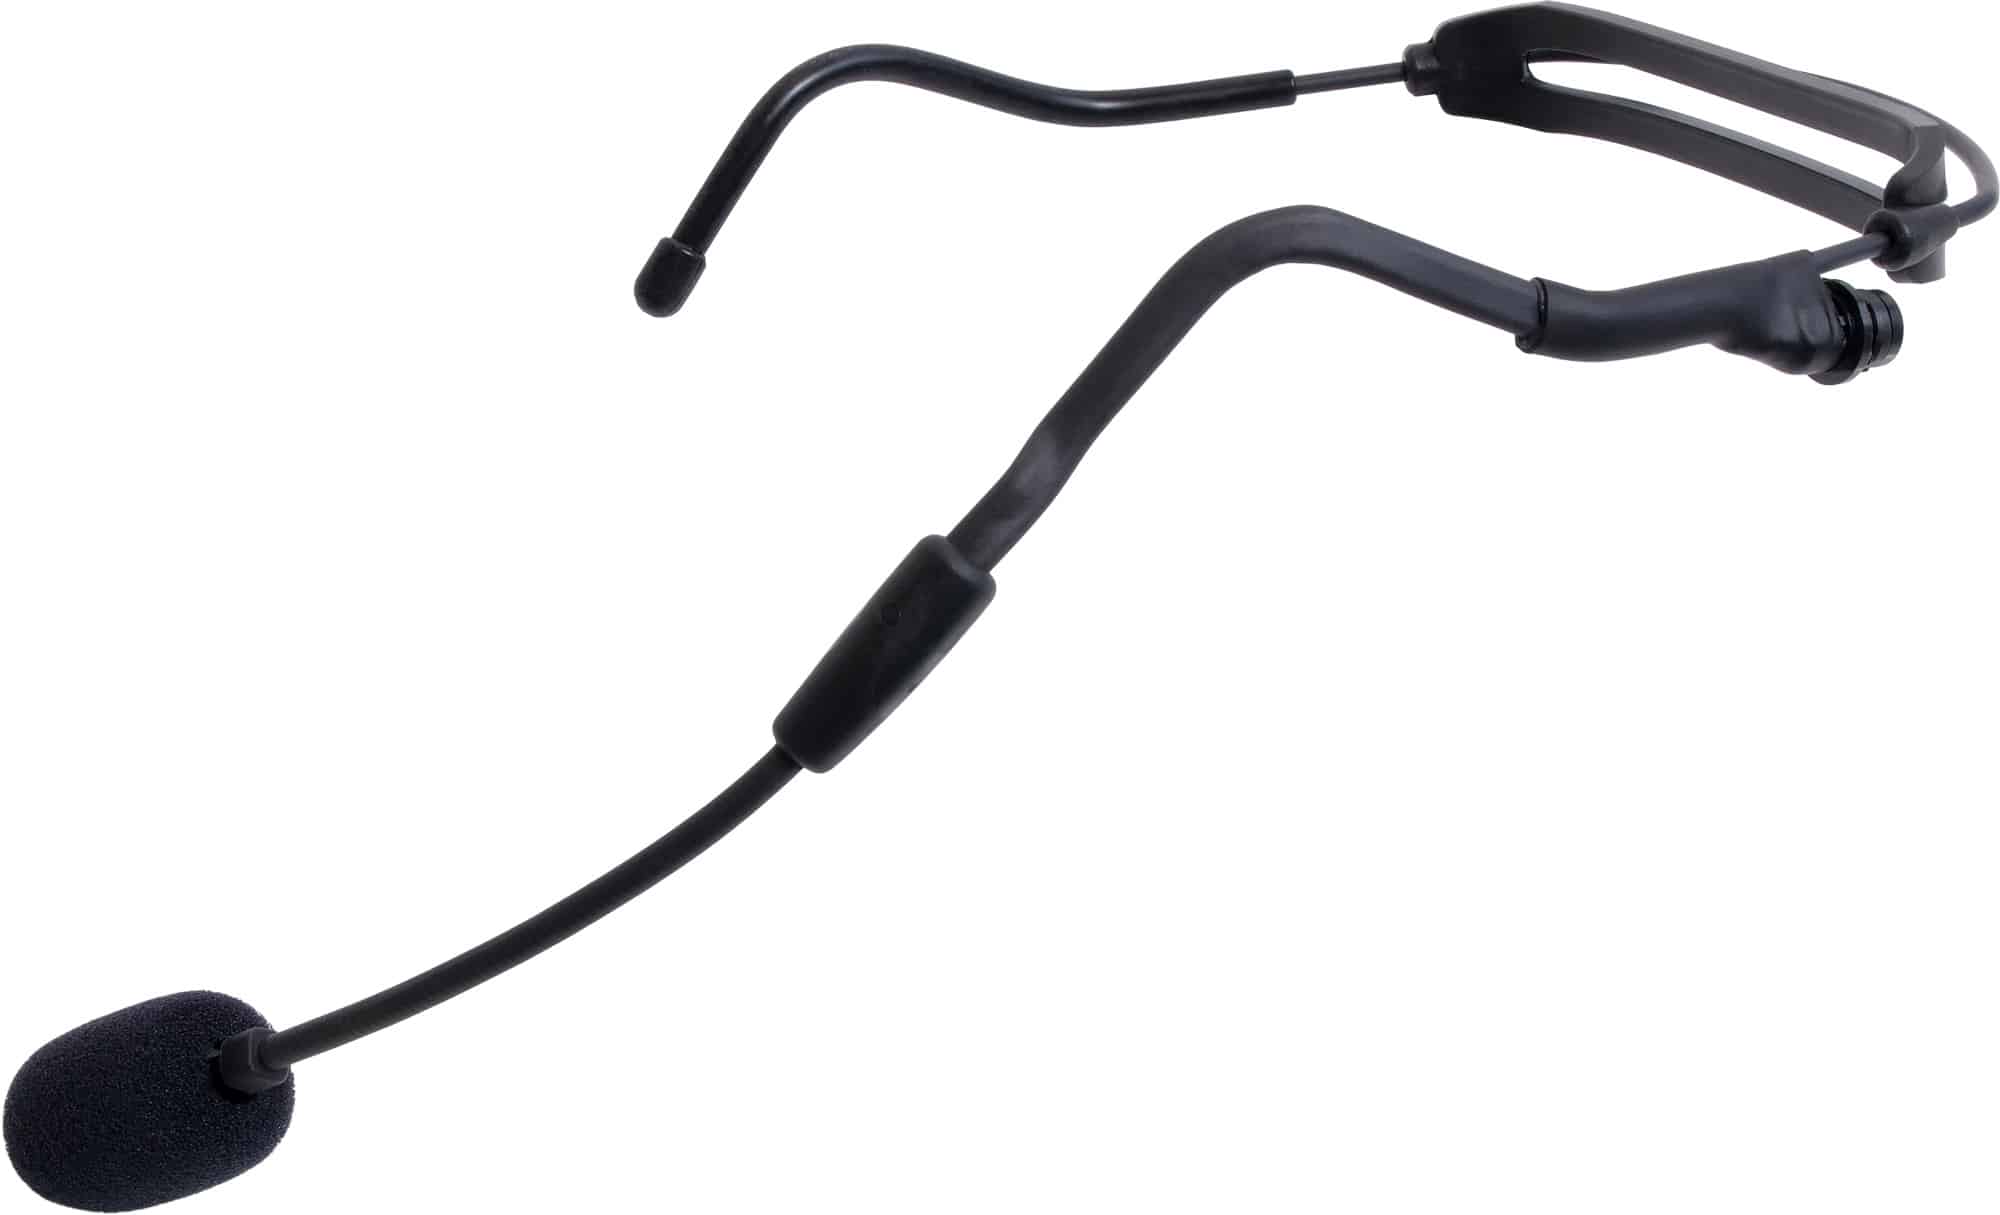 H2O7 HEAVY-DUTY Waterproof Fitness Dual Ear Headset Mic with Detachable Cable